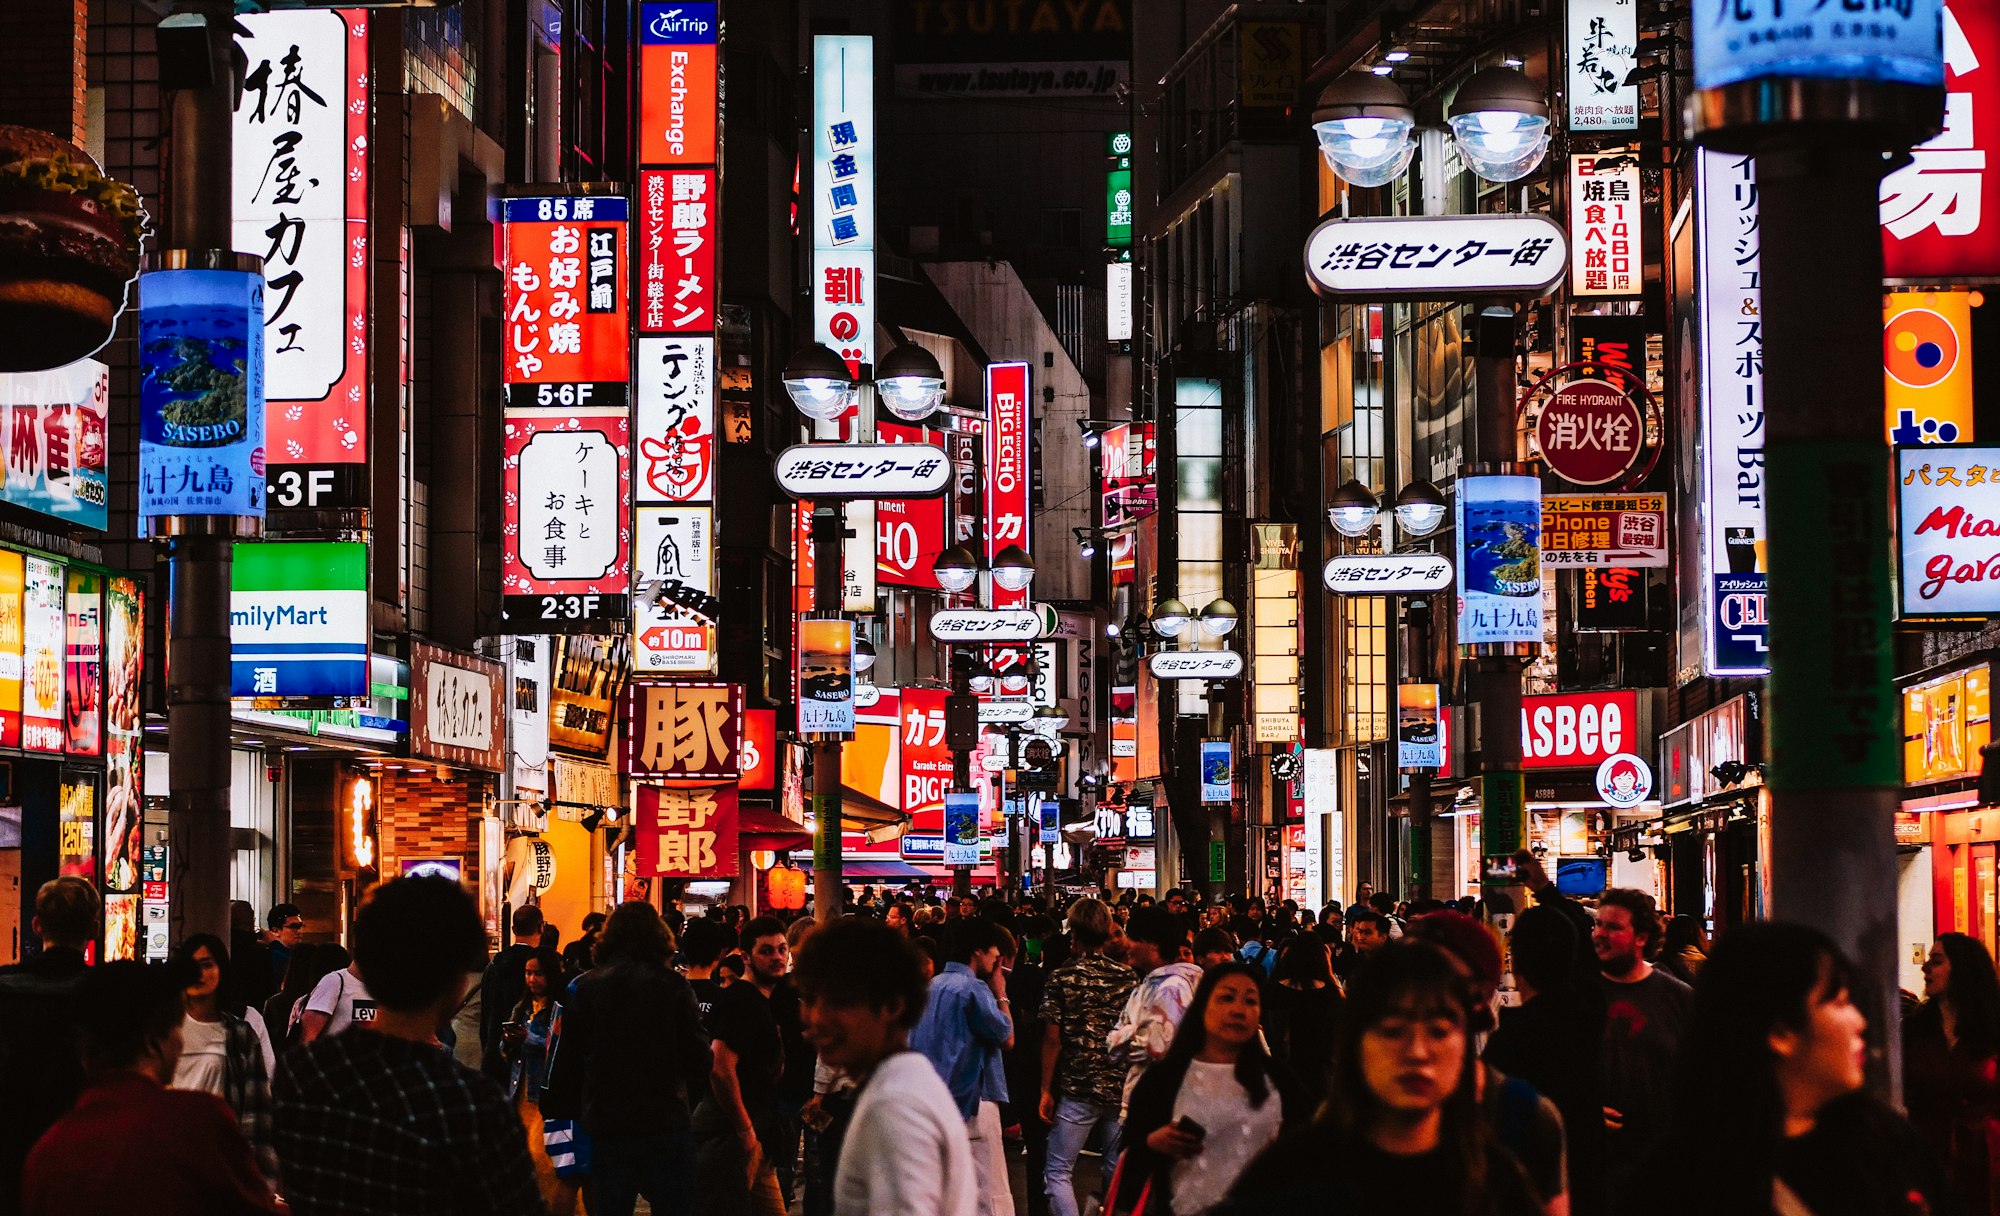 Night shot of a crowded street in Tokyo full of neon signs.